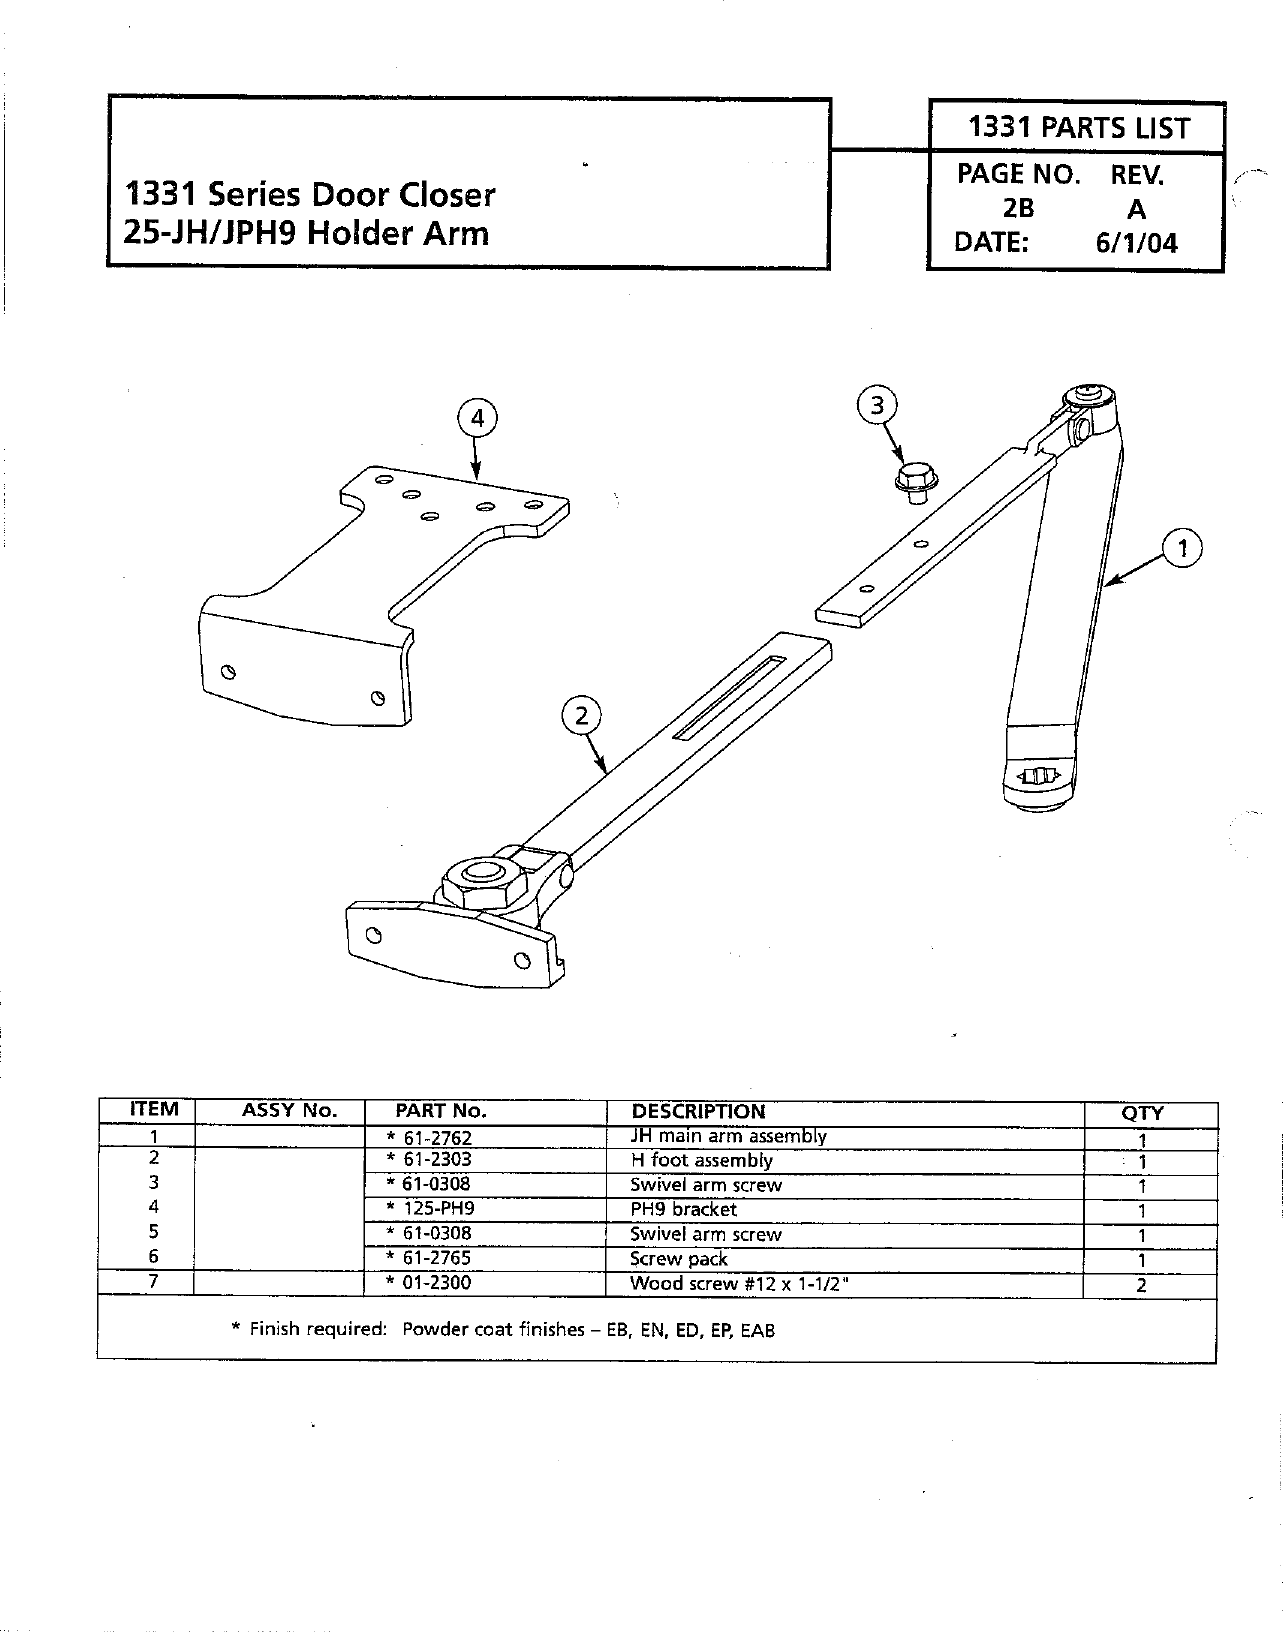 Page 1 of 1 - Sargent  1331 Series Door Closer 25-JH/JPH9 Holder Arm 1331.2-A